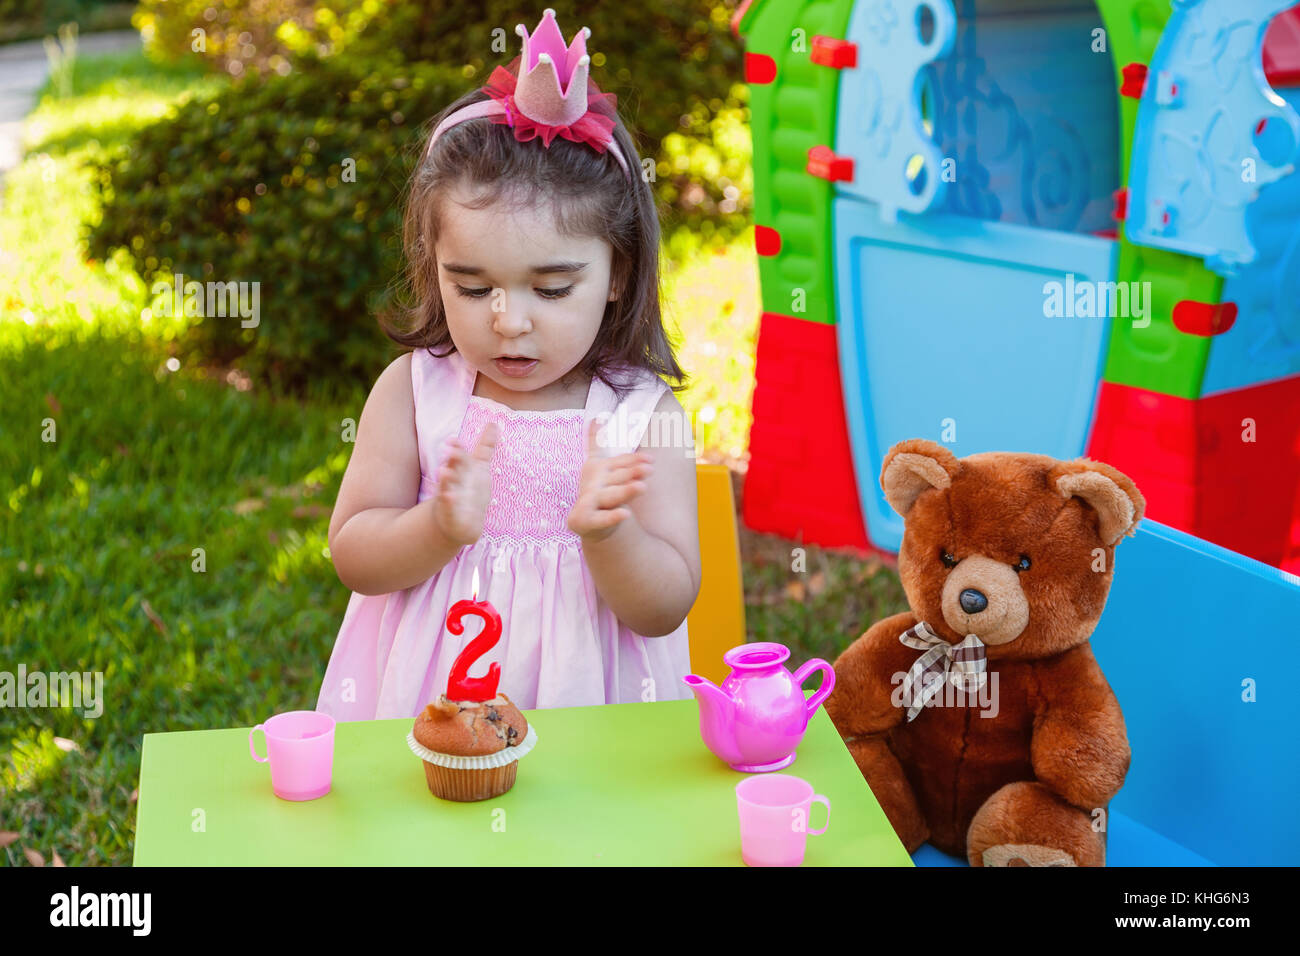 Baby toddler girl in outdoor second birthday party clapping hands at cake with Teddy Bear as best friend, playhouse and tea set. Pink dress and crown. Stock Photo